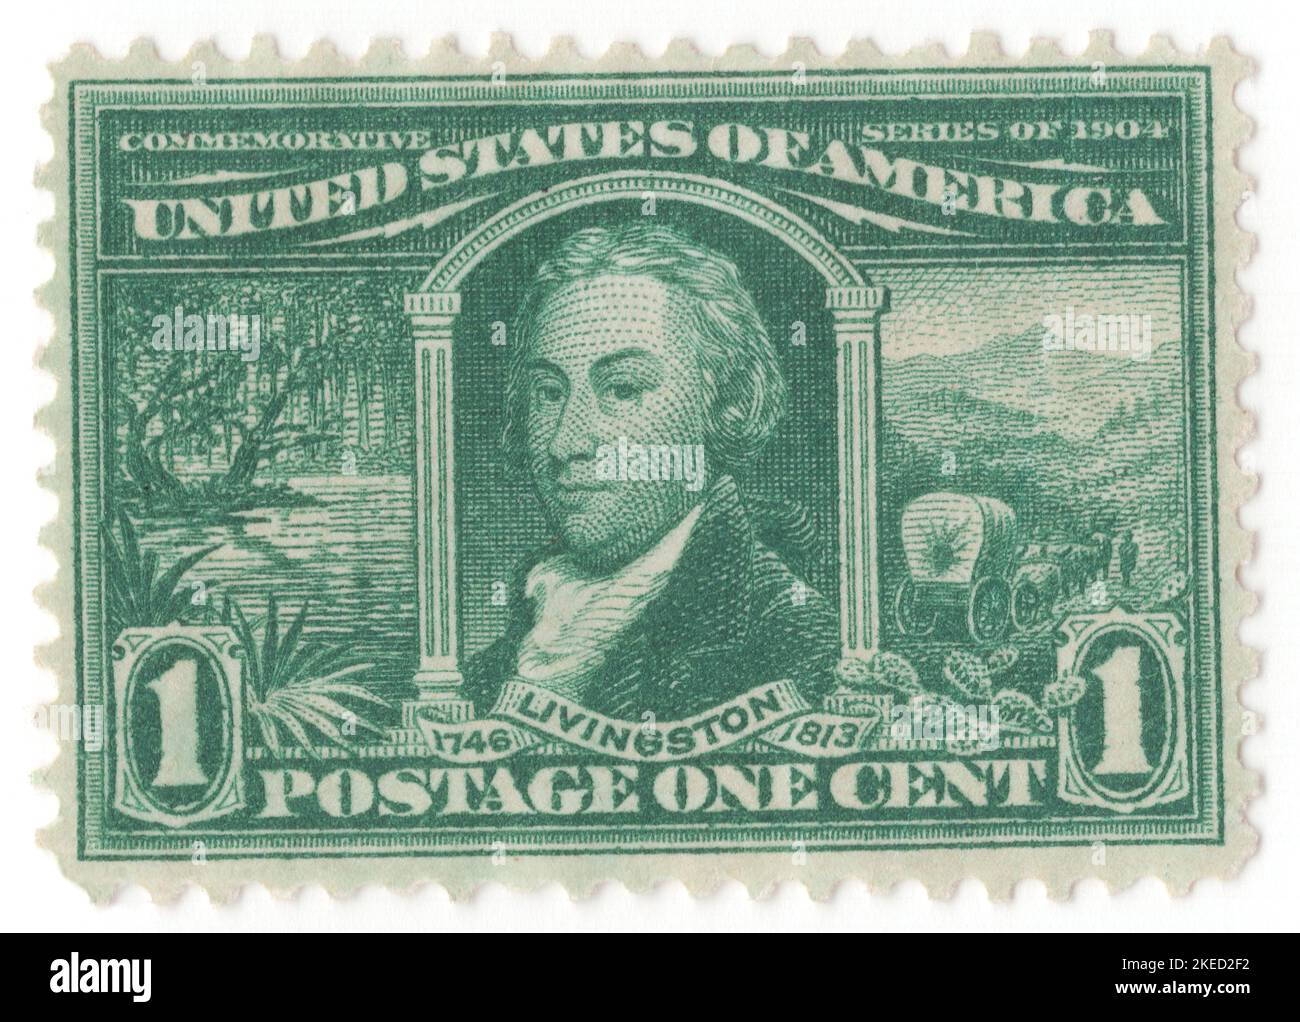 USA - 1904 April 30: An 1 cent green postage stamp depicting portrait Robert Lucian Livingston. Louisiana Purchase Exposition. American lawyer, politician, and diplomat from New York, as well as a Founding Father of the United States. He was known as 'The Chancellor', after the high New York state legal office he held for 25 years. He was a member of the Committee of Five that drafted the Declaration of Independence, along with Thomas Jefferson, Benjamin Franklin, John Adams, and Roger Sherman. Livingston administered the oath of office to George Washington Stock Photo